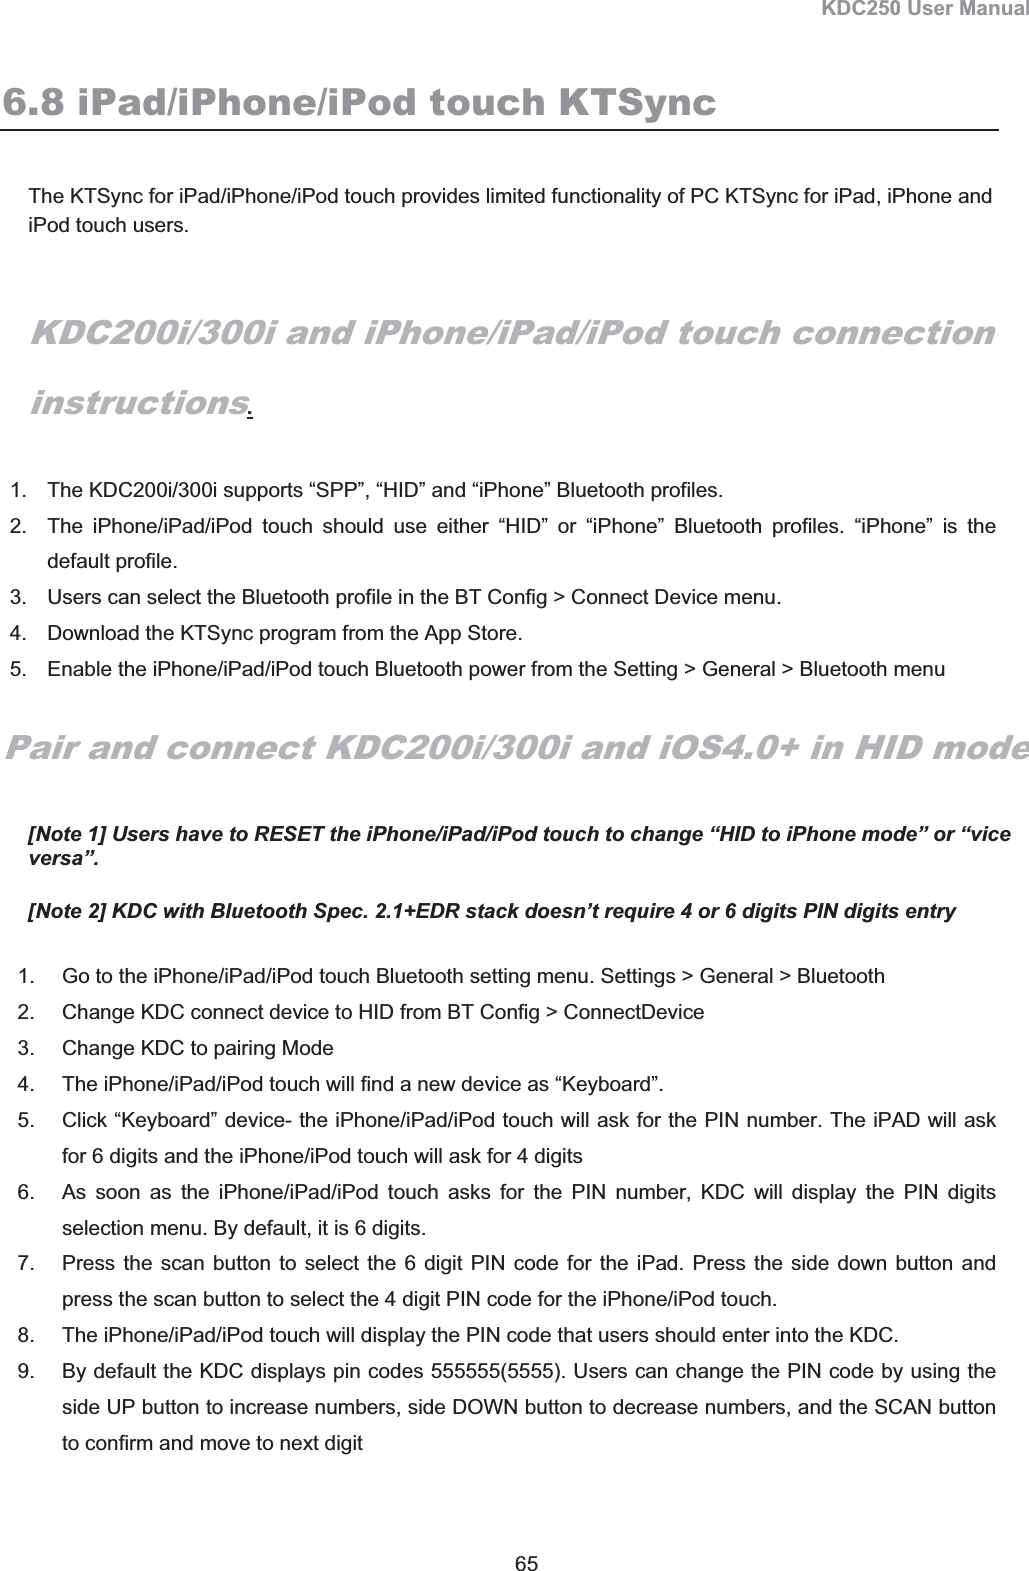 KDC250 User Manual 65 6.8 iPad/iPhone/iPod touch KTSync The KTSync for iPad/iPhone/iPod touch provides limited functionality of PC KTSync for iPad, iPhone and iPod touch users.  KDC200i/300i and iPhone/iPad/iPod touch connection instructions.1.  The KDC200i/300i supports “SPP”, “HID” and “iPhone” Bluetooth profiles. 2.  The iPhone/iPad/iPod touch should use either “HID” or “iPhone” Bluetooth profiles. “iPhone” is the default profile. 3.  Users can select the Bluetooth profile in the BT Config &gt; Connect Device menu. 4.  Download the KTSync program from the App Store. 5.  Enable the iPhone/iPad/iPod touch Bluetooth power from the Setting &gt; General &gt; Bluetooth menu Pair and connect KDC200i/300i and iOS4.0+ in HID mode [Note 1] Users have to RESET the iPhone/iPad/iPod touch to change “HID to iPhone mode” or “vice versa”. [Note 2] KDC with Bluetooth Spec. 2.1+EDR stack doesn’t require 4 or 6 digits PIN digits entry 1.  Go to the iPhone/iPad/iPod touch Bluetooth setting menu. Settings &gt; General &gt; Bluetooth 2.  Change KDC connect device to HID from BT Config &gt; ConnectDevice 3.  Change KDC to pairing Mode 4.  The iPhone/iPad/iPod touch will find a new device as “Keyboard”. 5.  Click “Keyboard” device- the iPhone/iPad/iPod touch will ask for the PIN number. The iPAD will ask for 6 digits and the iPhone/iPod touch will ask for 4 digits 6.  As soon as the iPhone/iPad/iPod touch asks for the PIN number, KDC will display the PIN digits selection menu. By default, it is 6 digits. 7.  Press the scan button to select the 6 digit PIN code for the iPad. Press the side down button and press the scan button to select the 4 digit PIN code for the iPhone/iPod touch. 8.  The iPhone/iPad/iPod touch will display the PIN code that users should enter into the KDC. 9.  By default the KDC displays pin codes 555555(5555). Users can change the PIN code by using the side UP button to increase numbers, side DOWN button to decrease numbers, and the SCAN button to confirm and move to next digit 